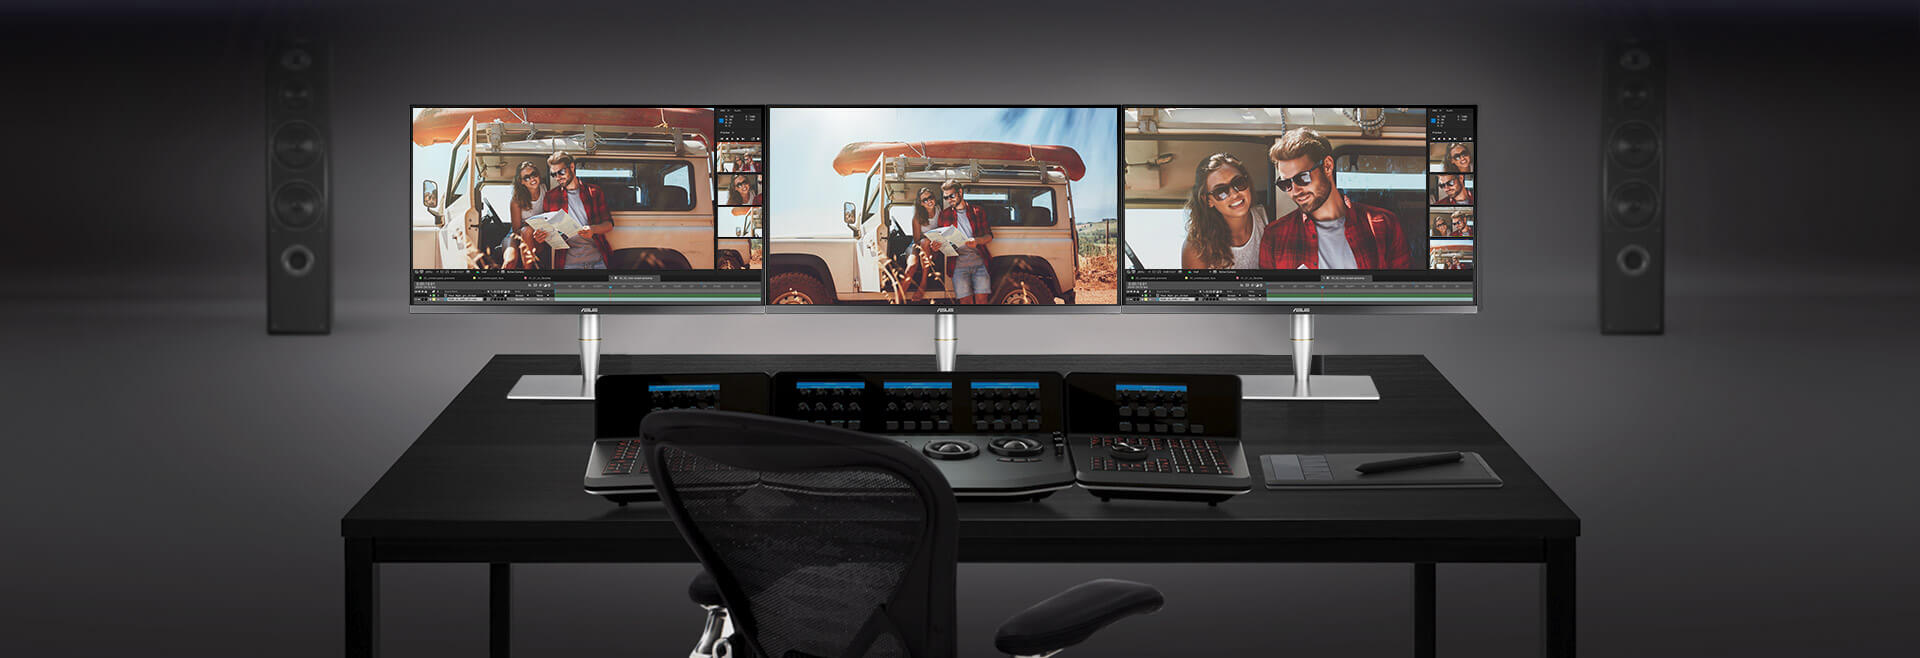 Futuristic Best Monitor 4K Video Editing in Living room